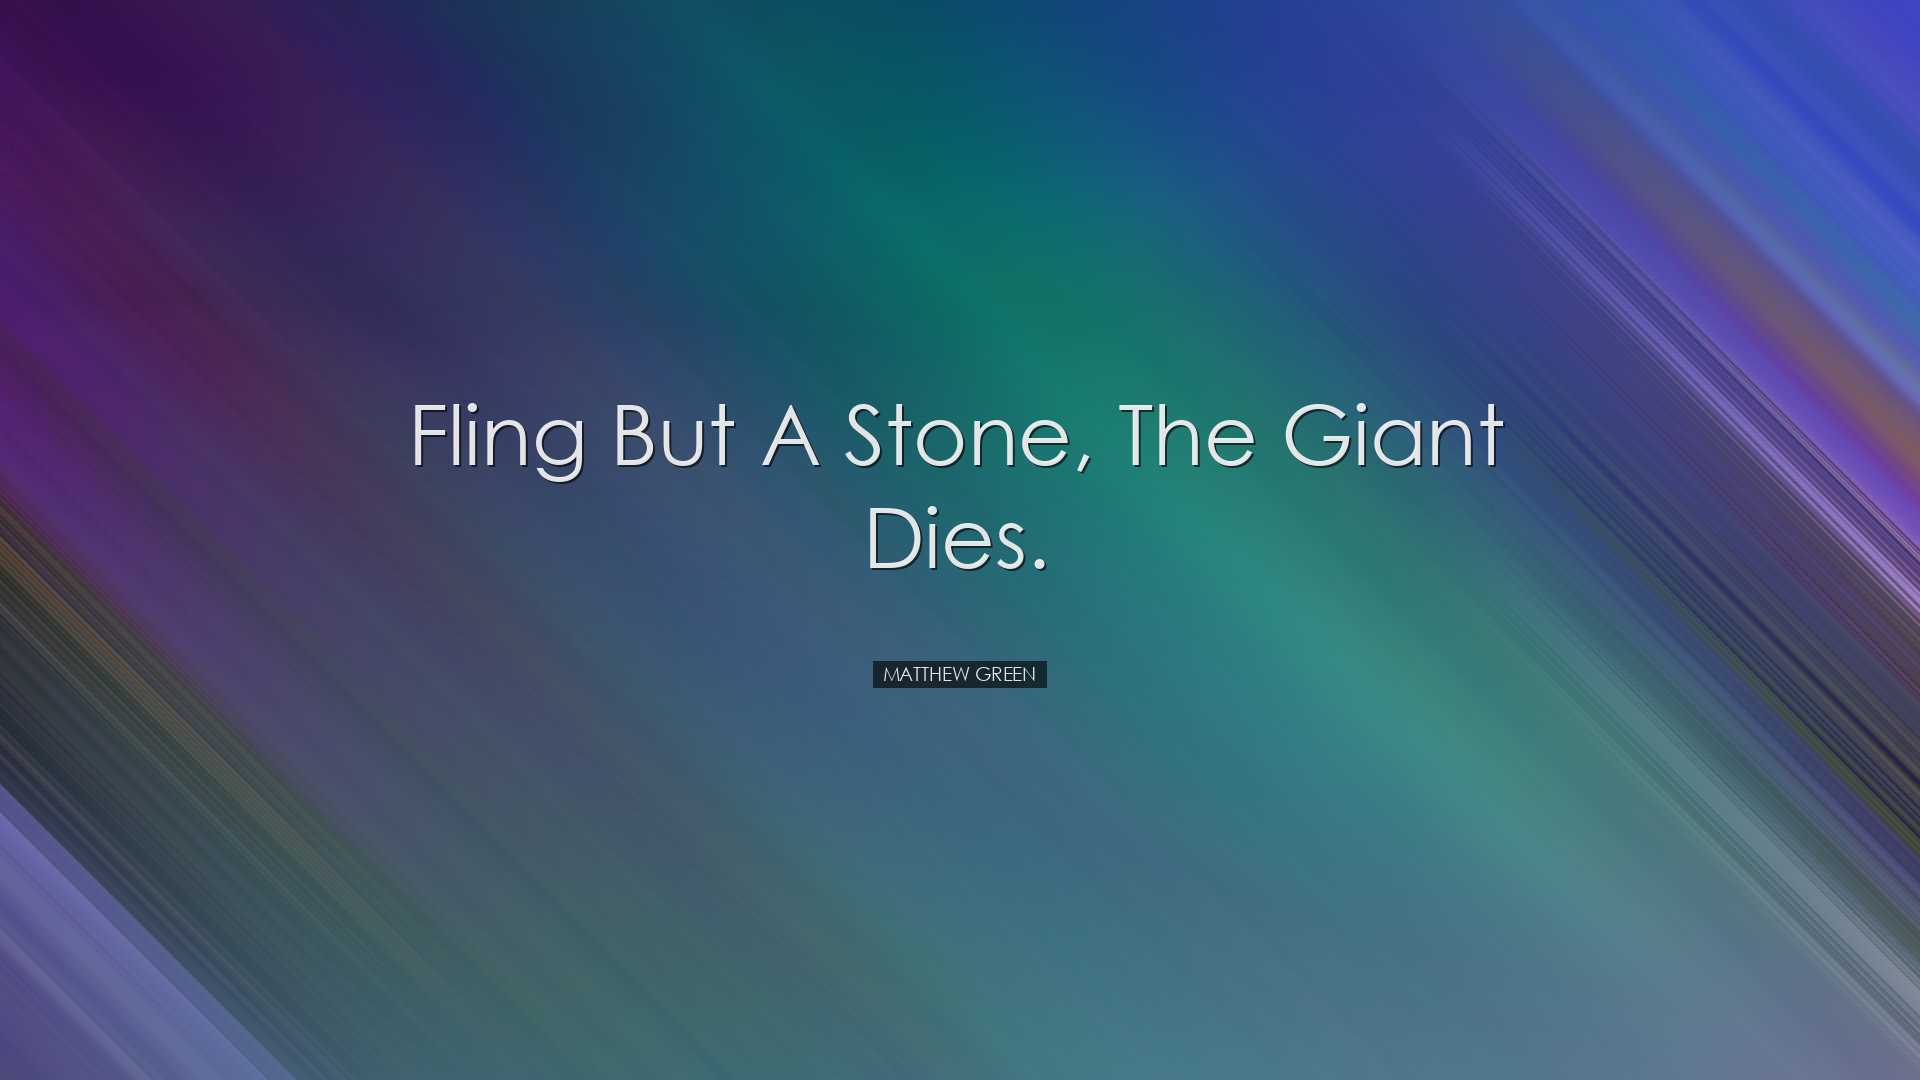 Fling but a stone, the giant dies. - Matthew Green